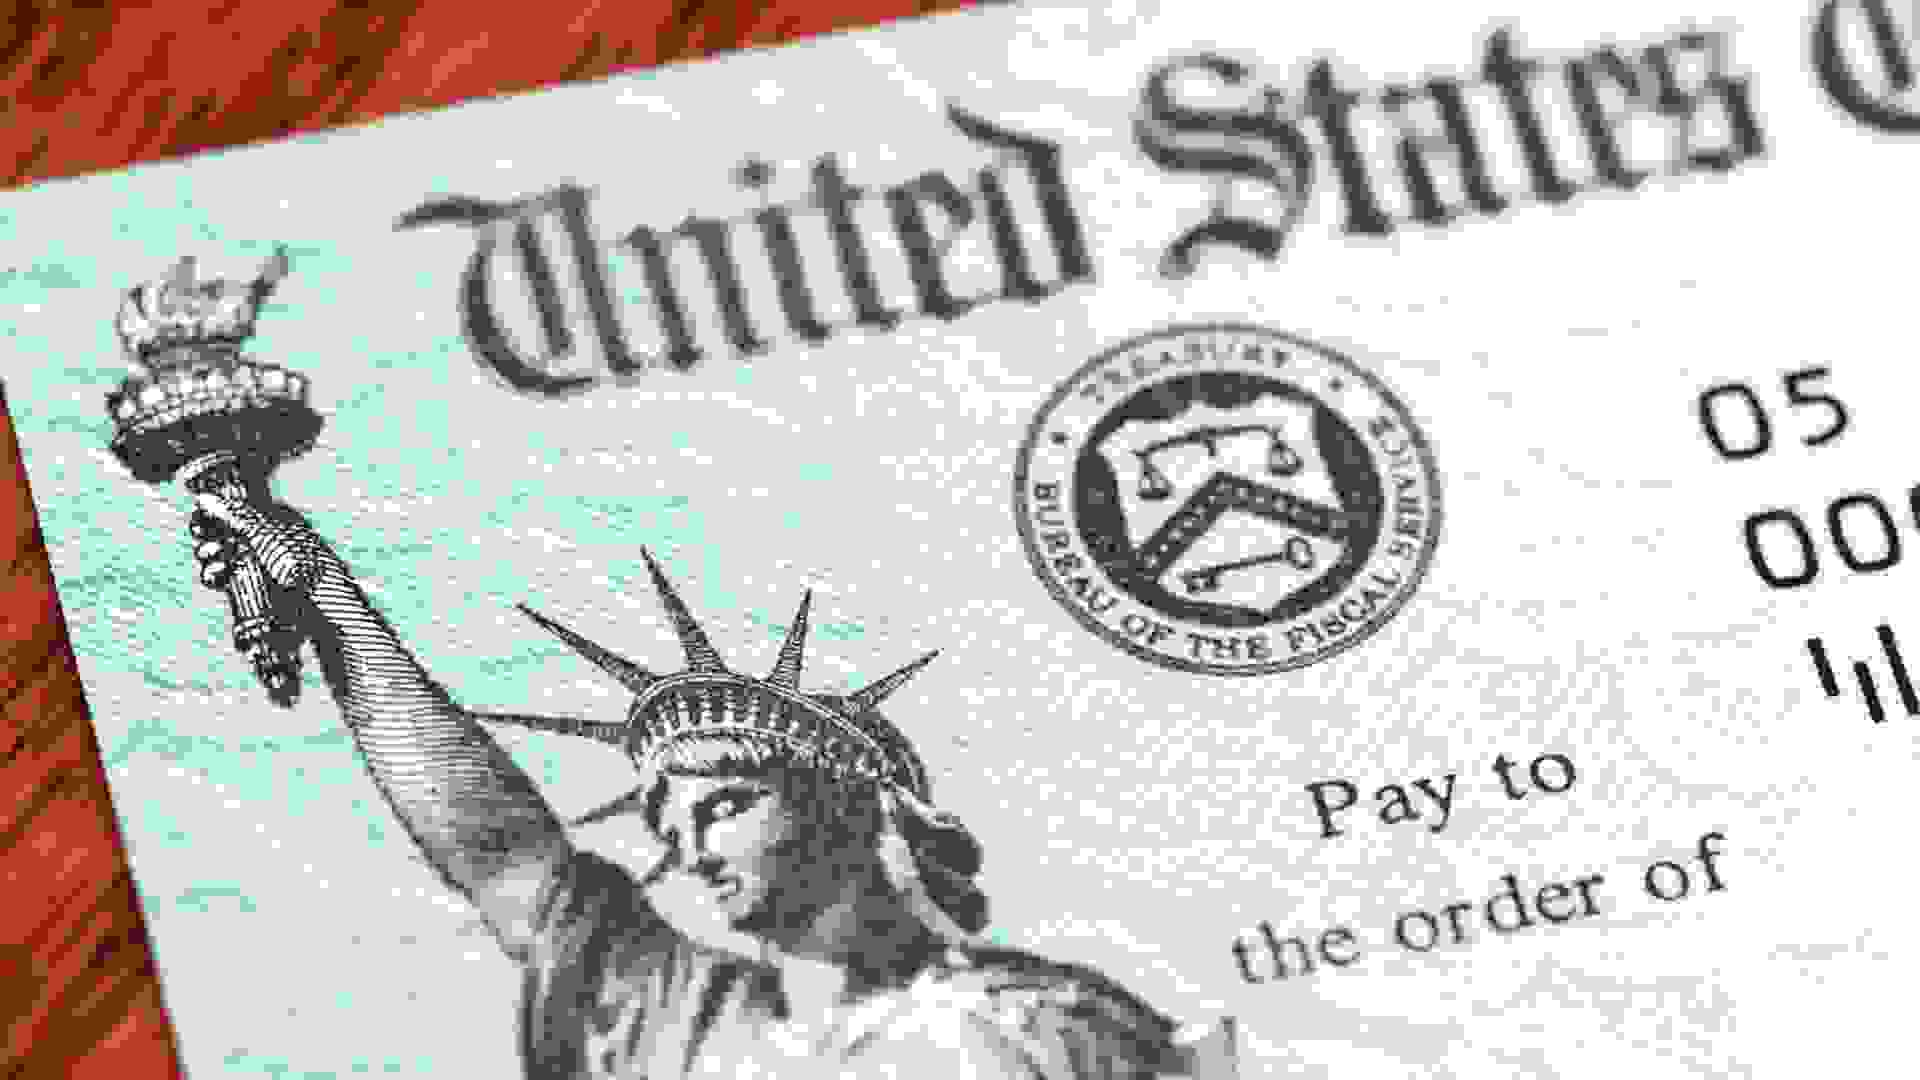 Partial view of a USA Treasury Internal Revenue Service tax refund check showing the Treasury seal and image of the Statue of Liberty.